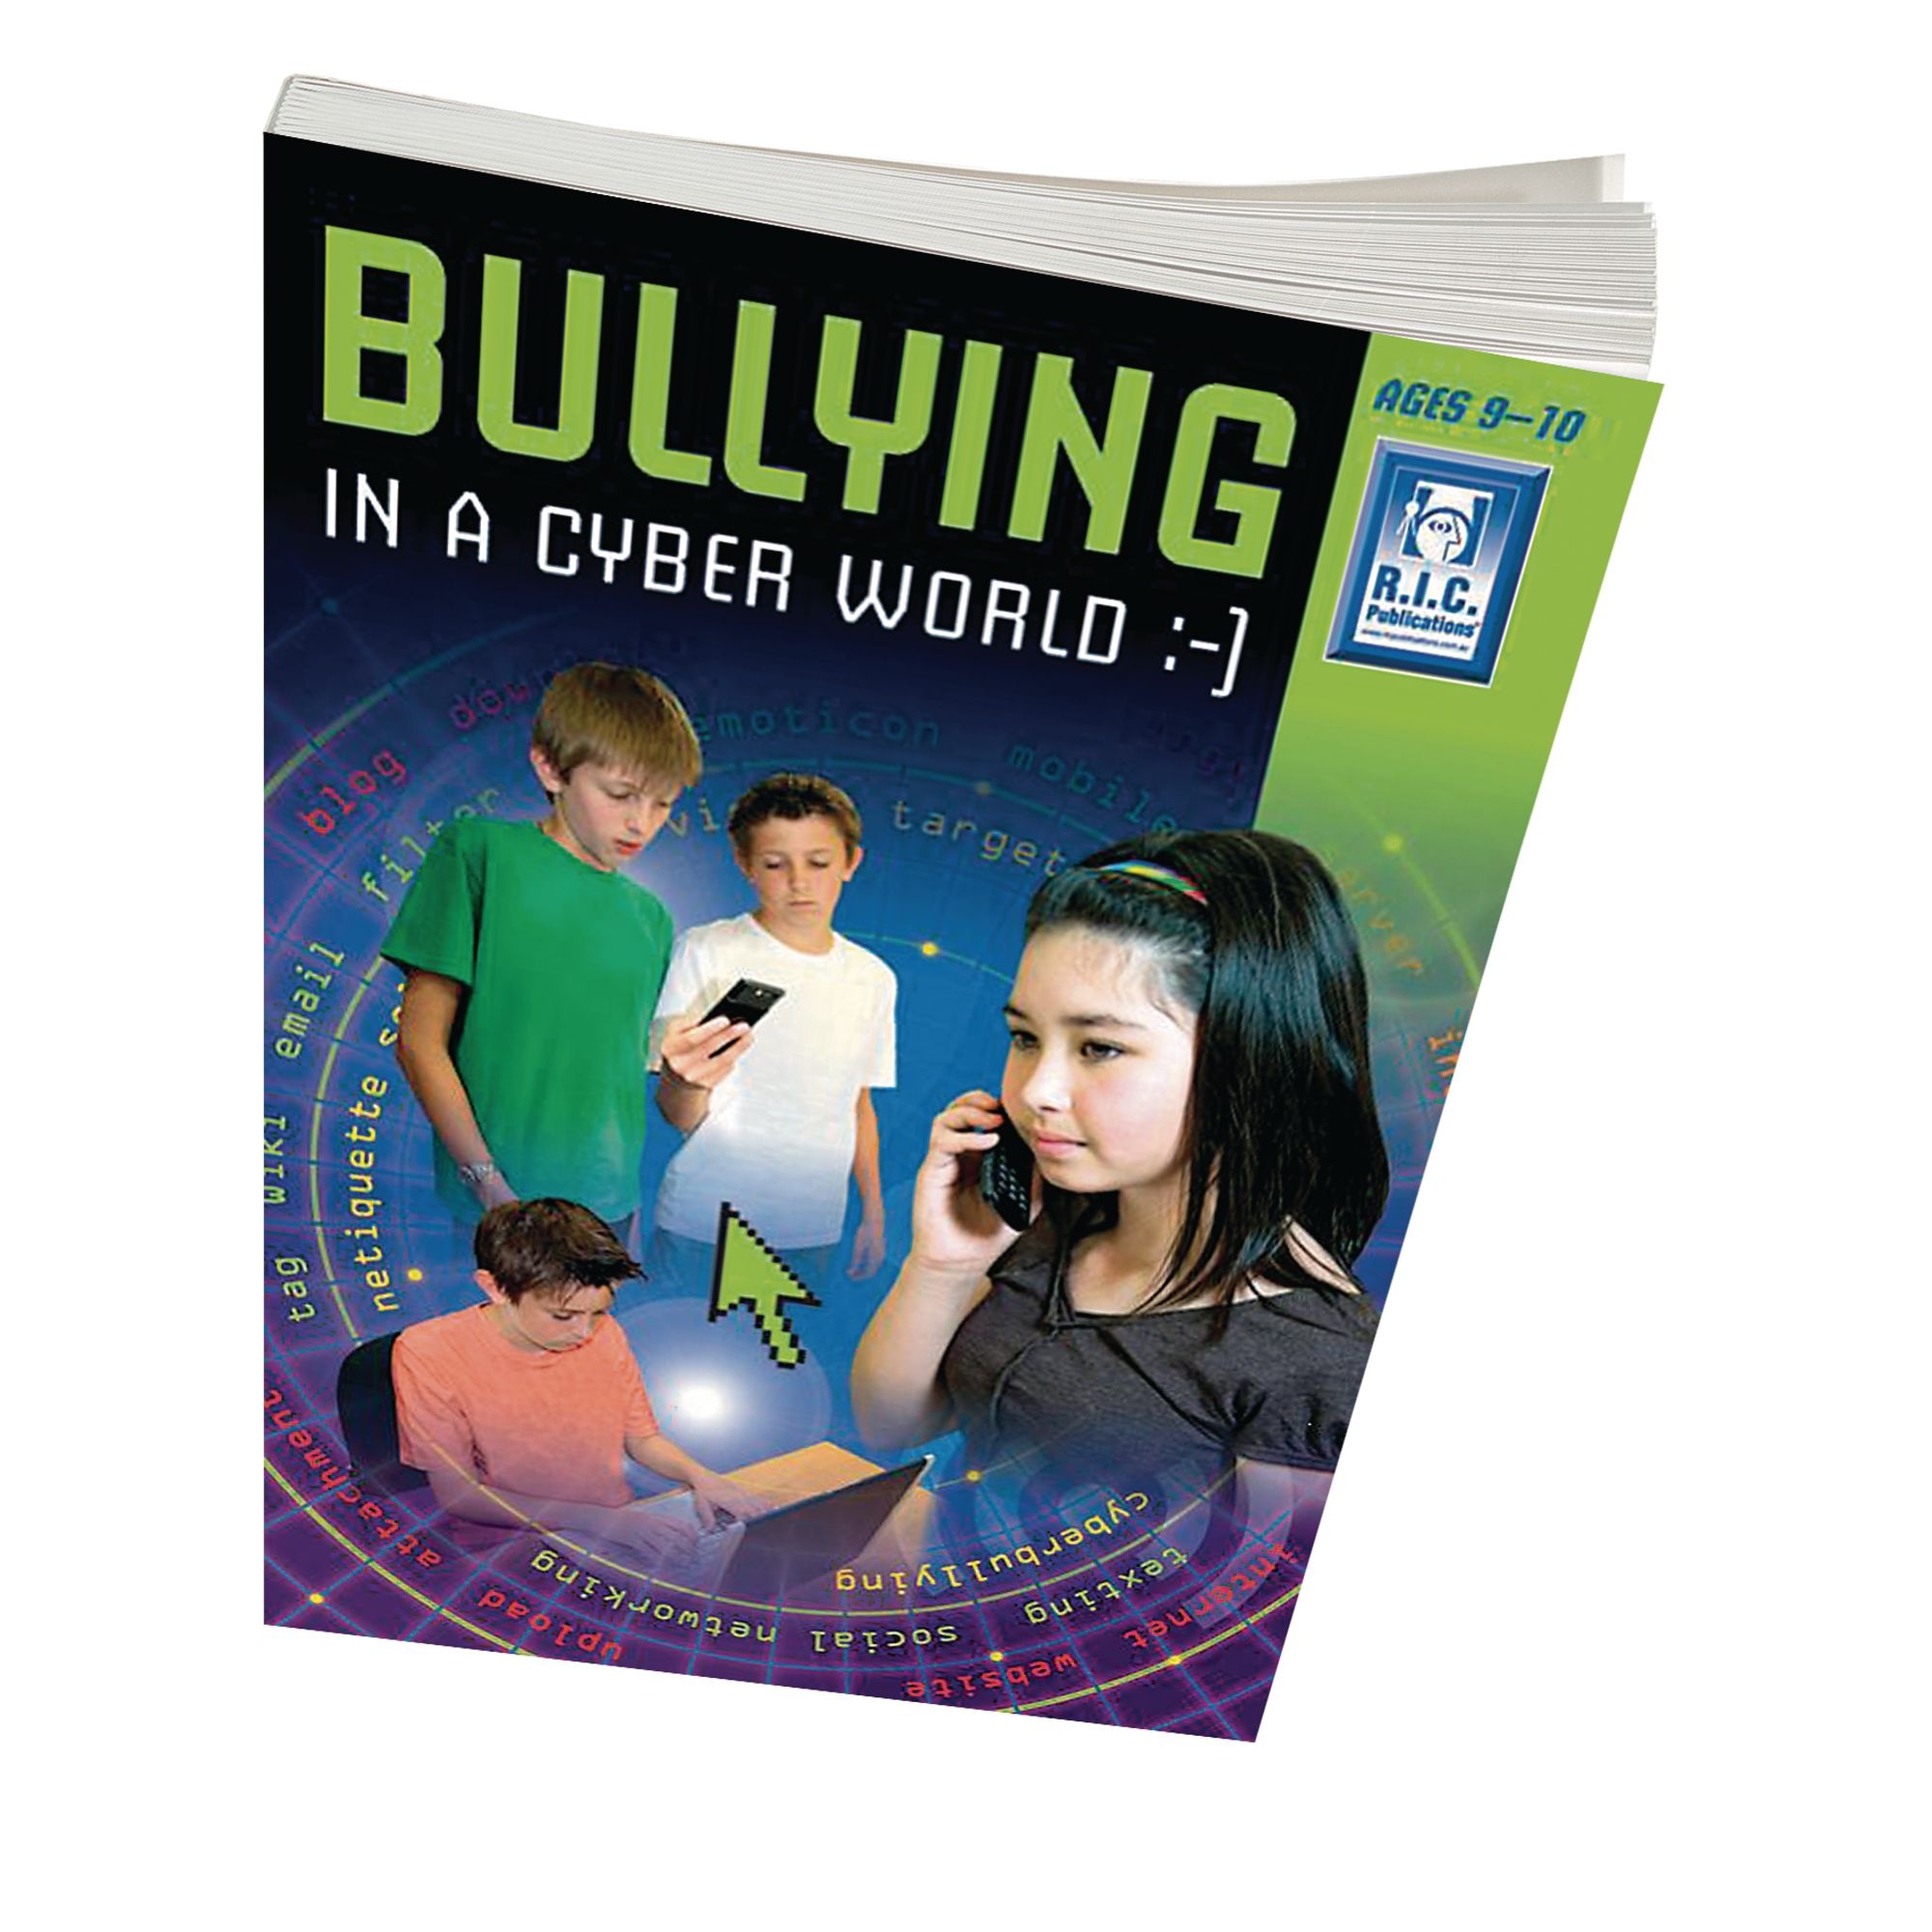 Bullying In a Cyber World - Middle